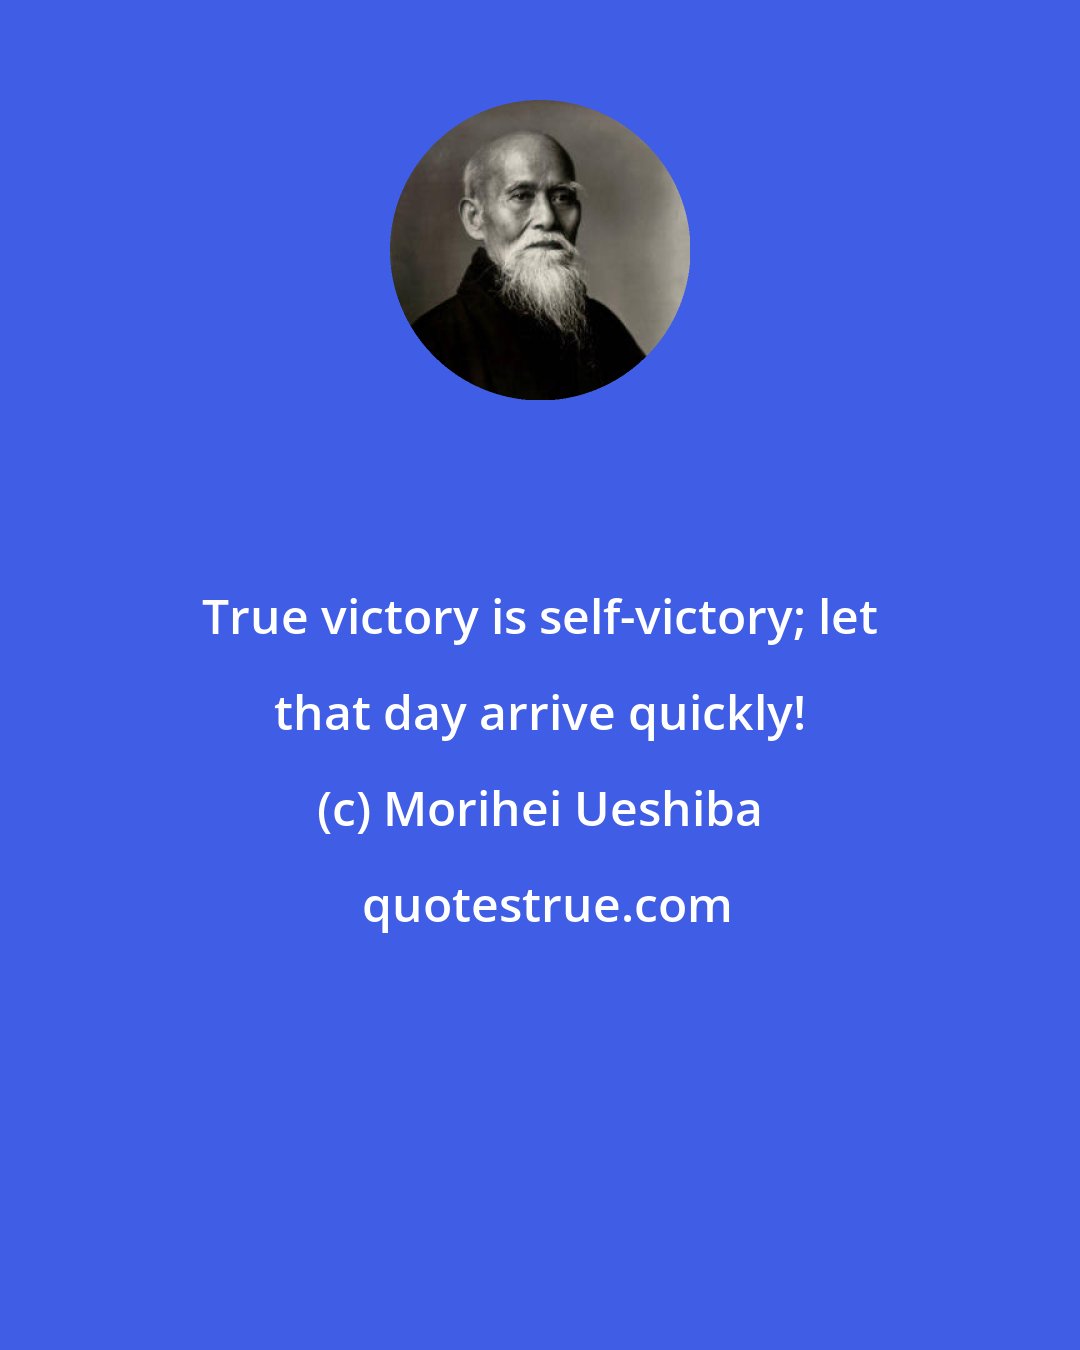 Morihei Ueshiba: True victory is self-victory; let that day arrive quickly!